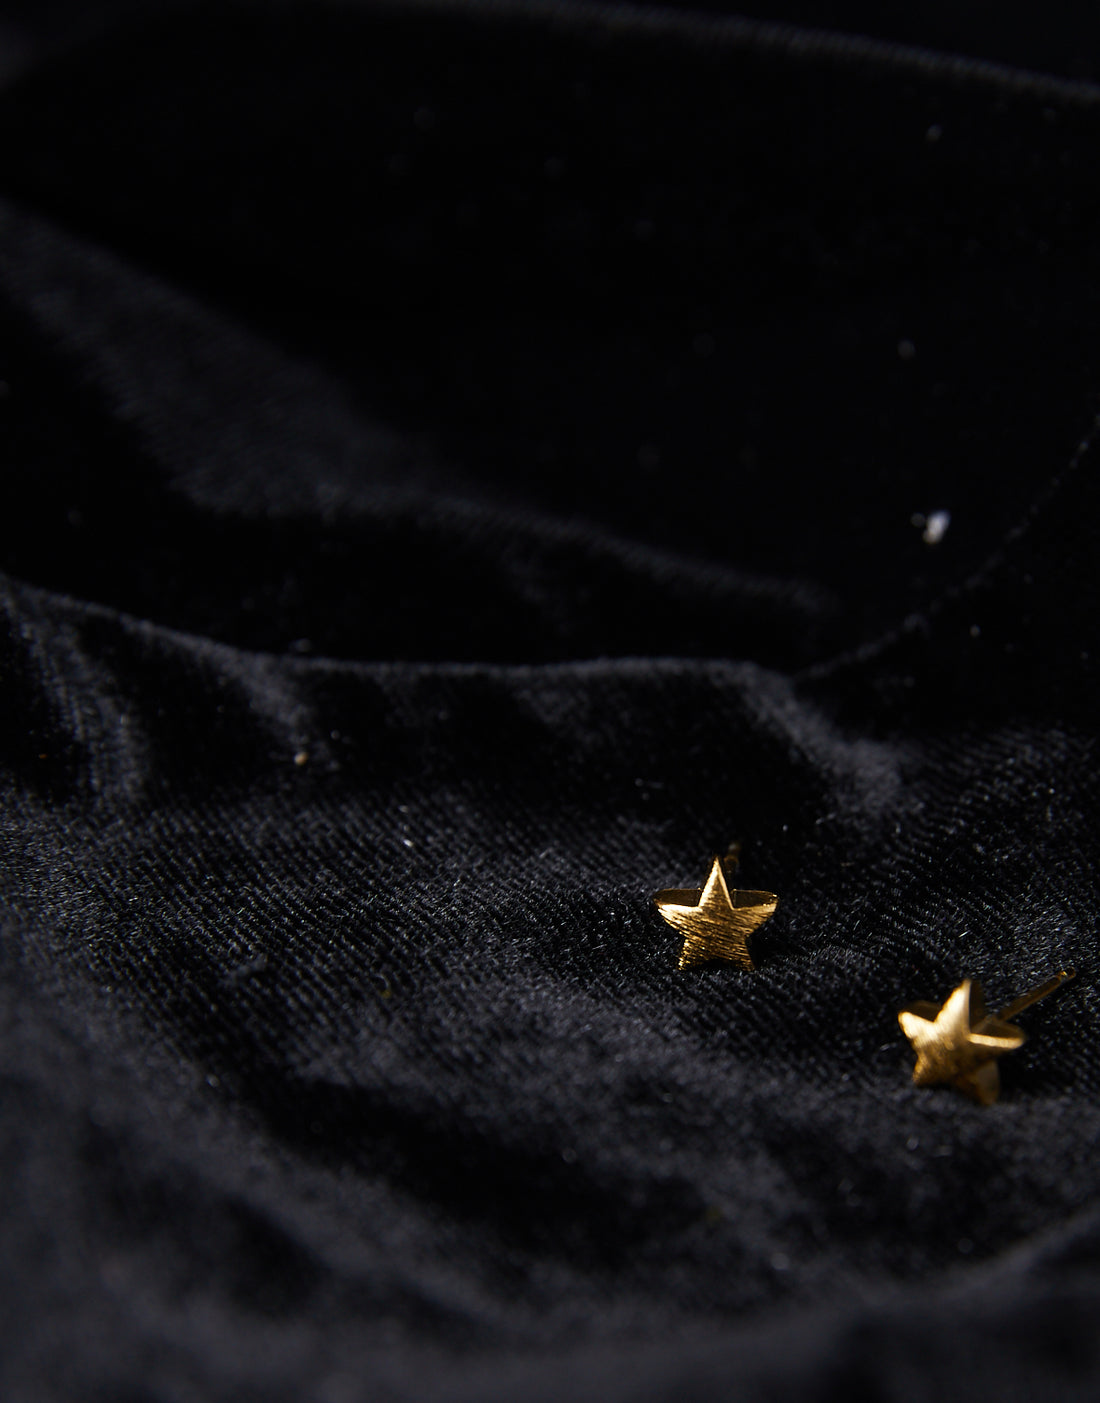 Tiny Star Stud Earrings Jewelry Gold One Size -2020AVE